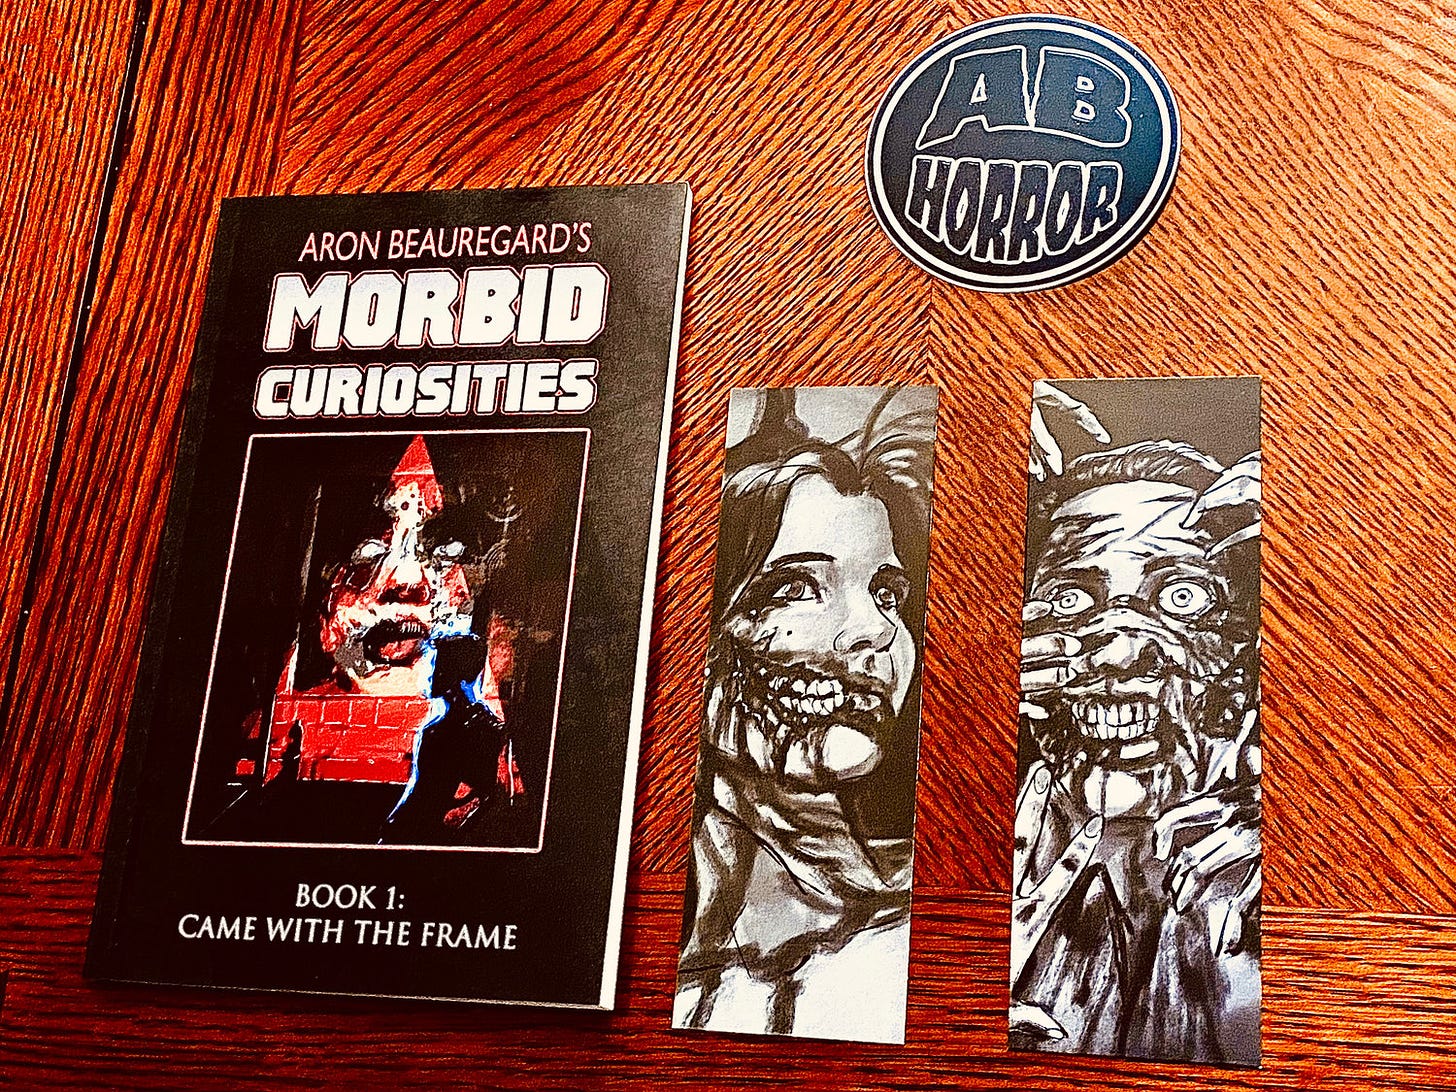 PREORDER - Morbid Curiosities Book 1: Came With the Frame - Signed Paperback Bundle